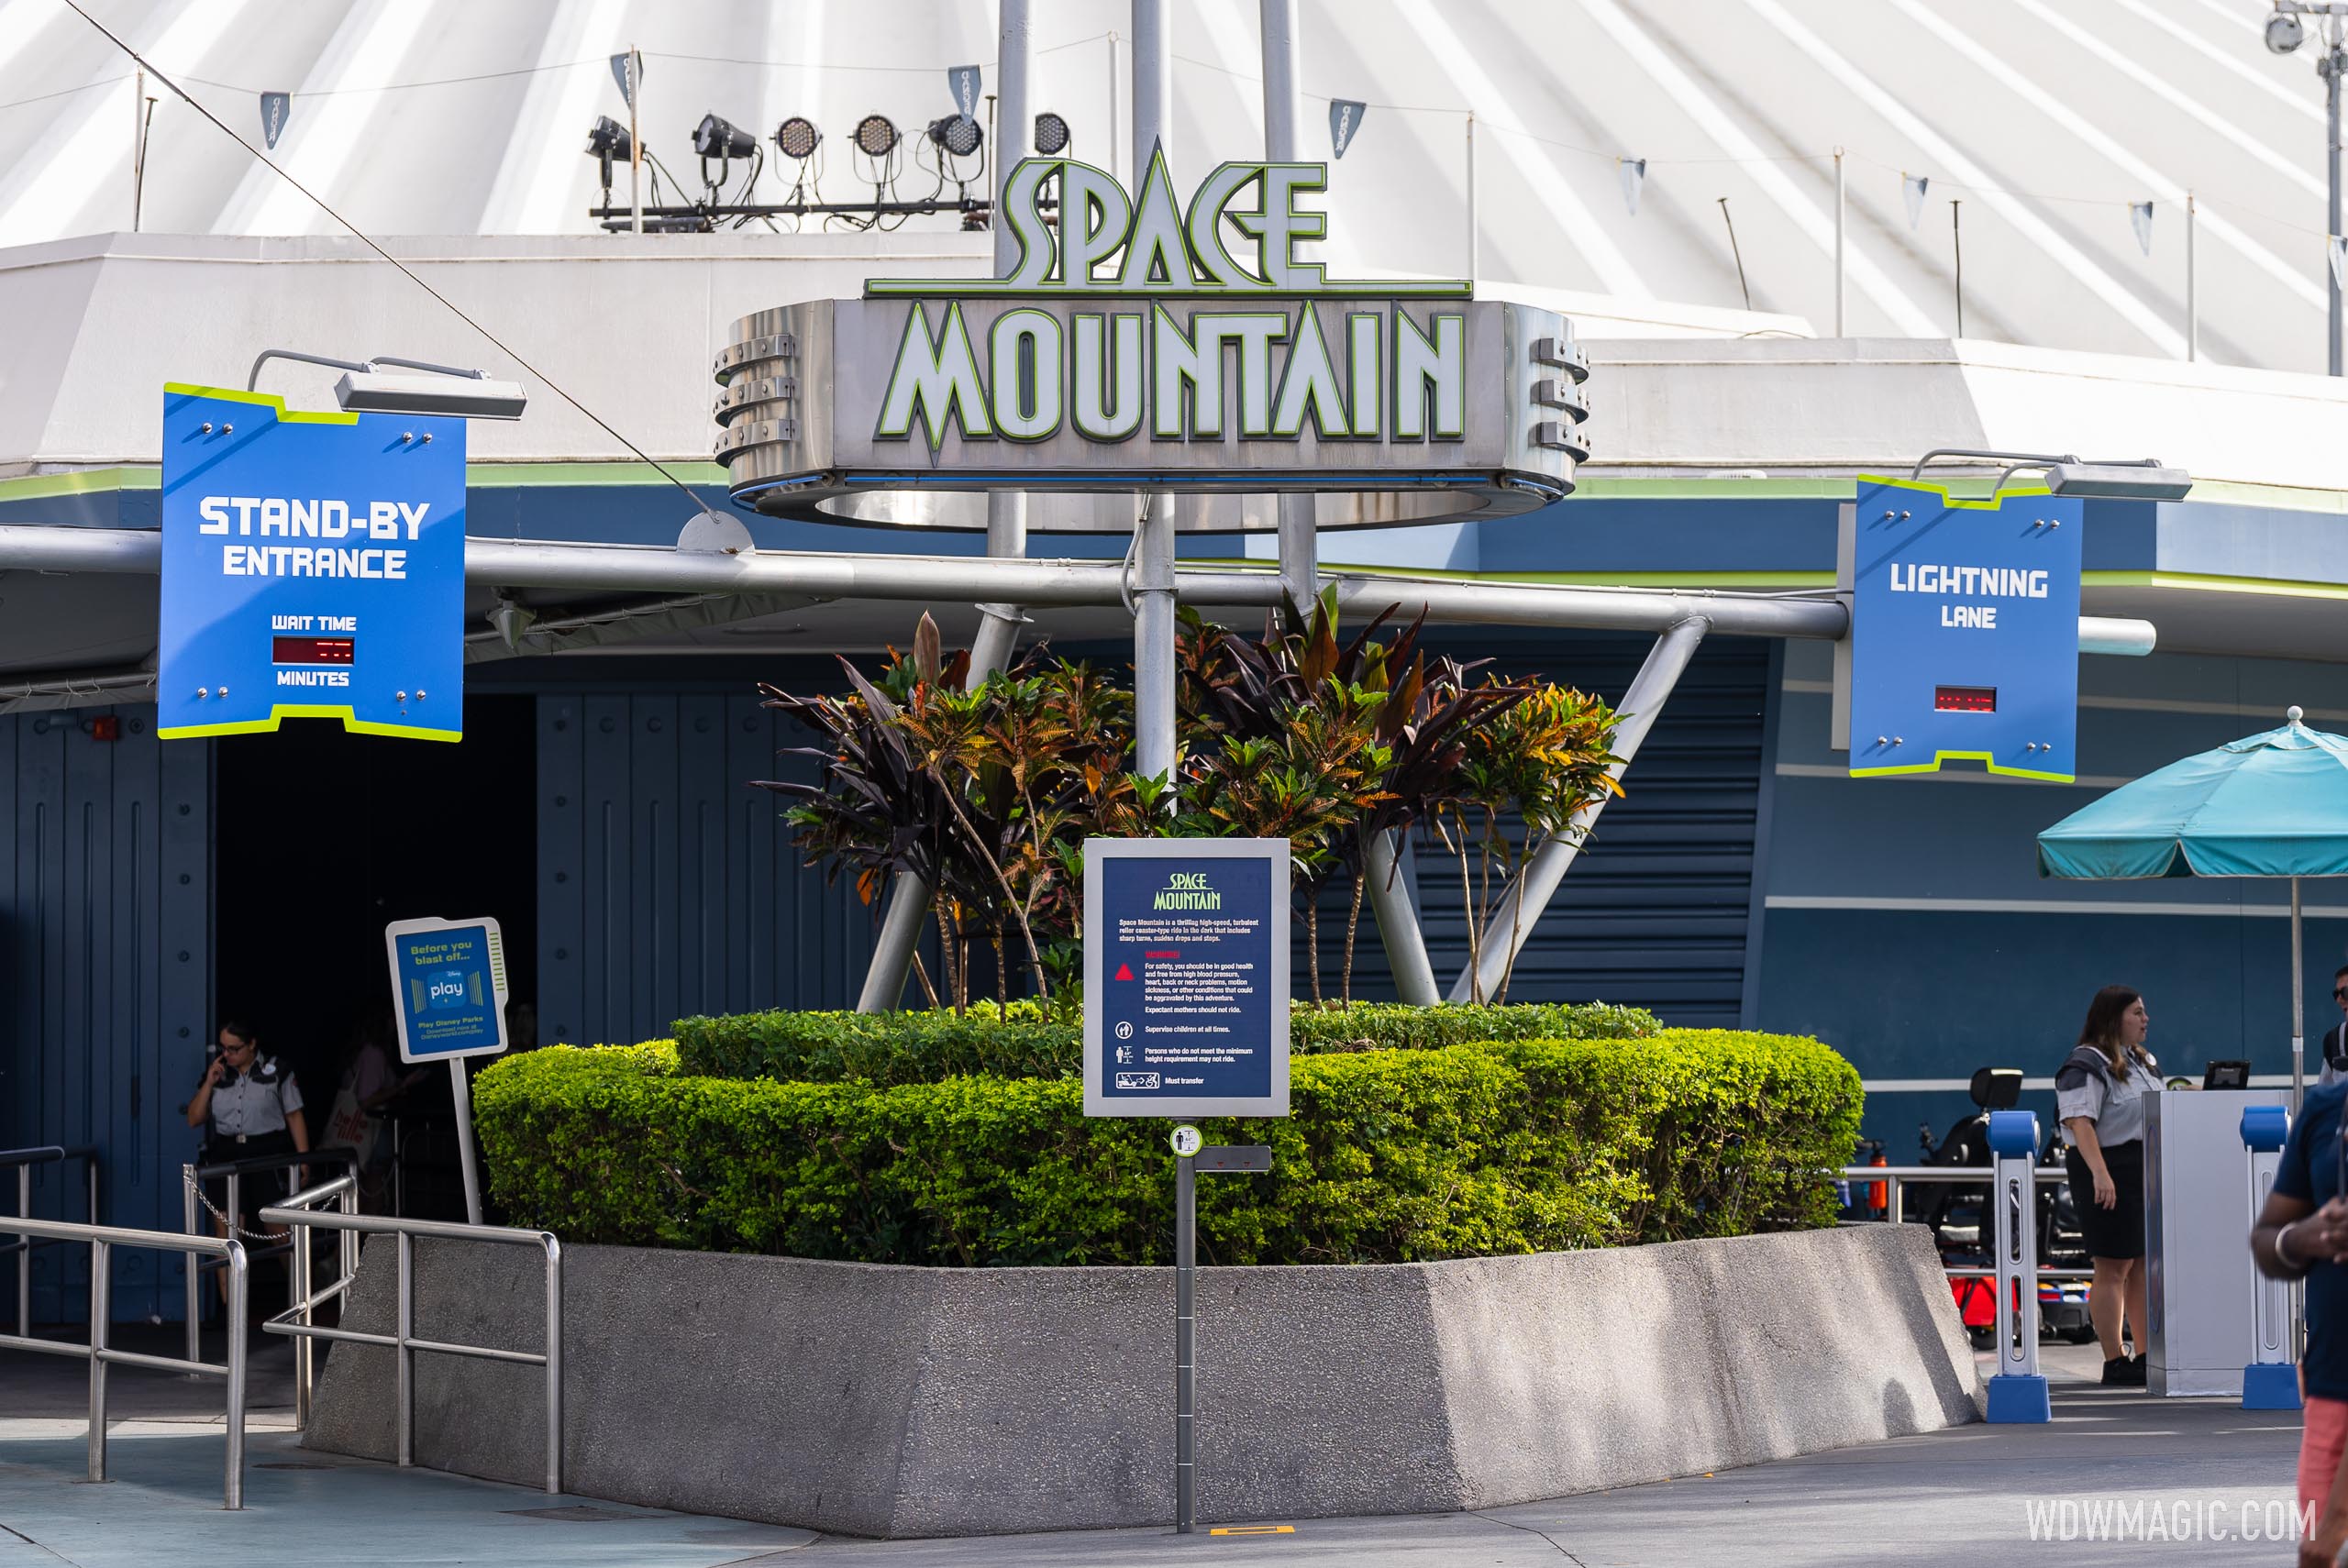 Disney World updates rider rules on Space Mountain for hand-held items